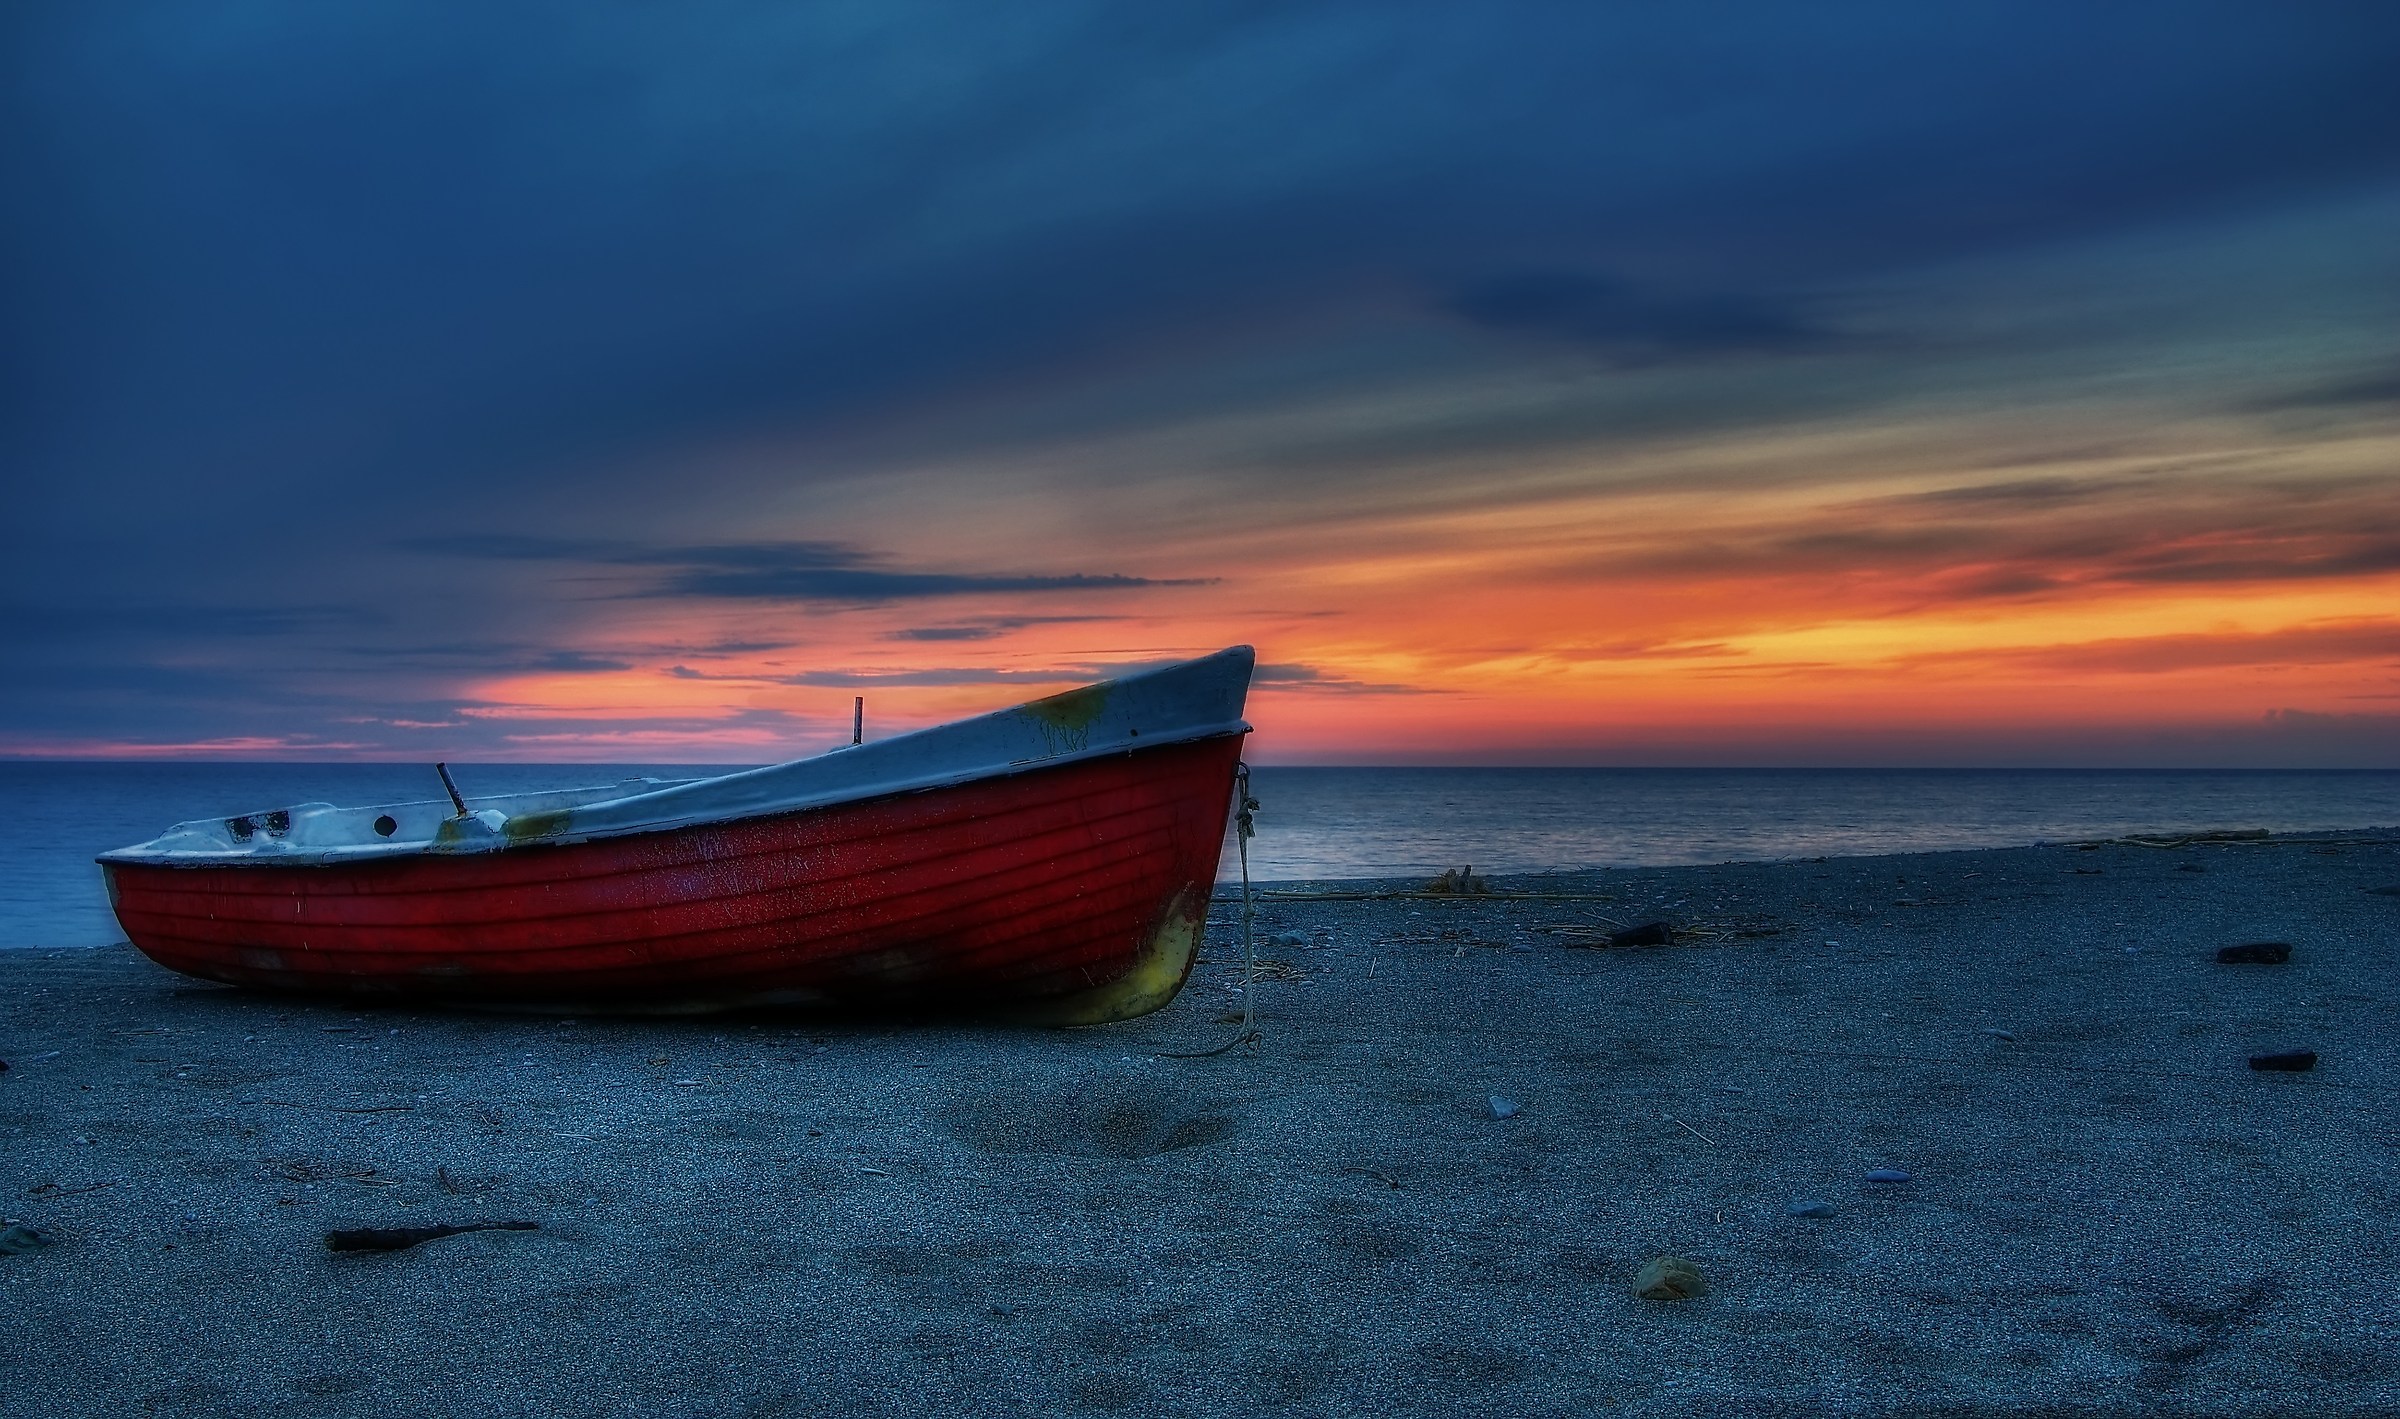 The red boat - HDR...